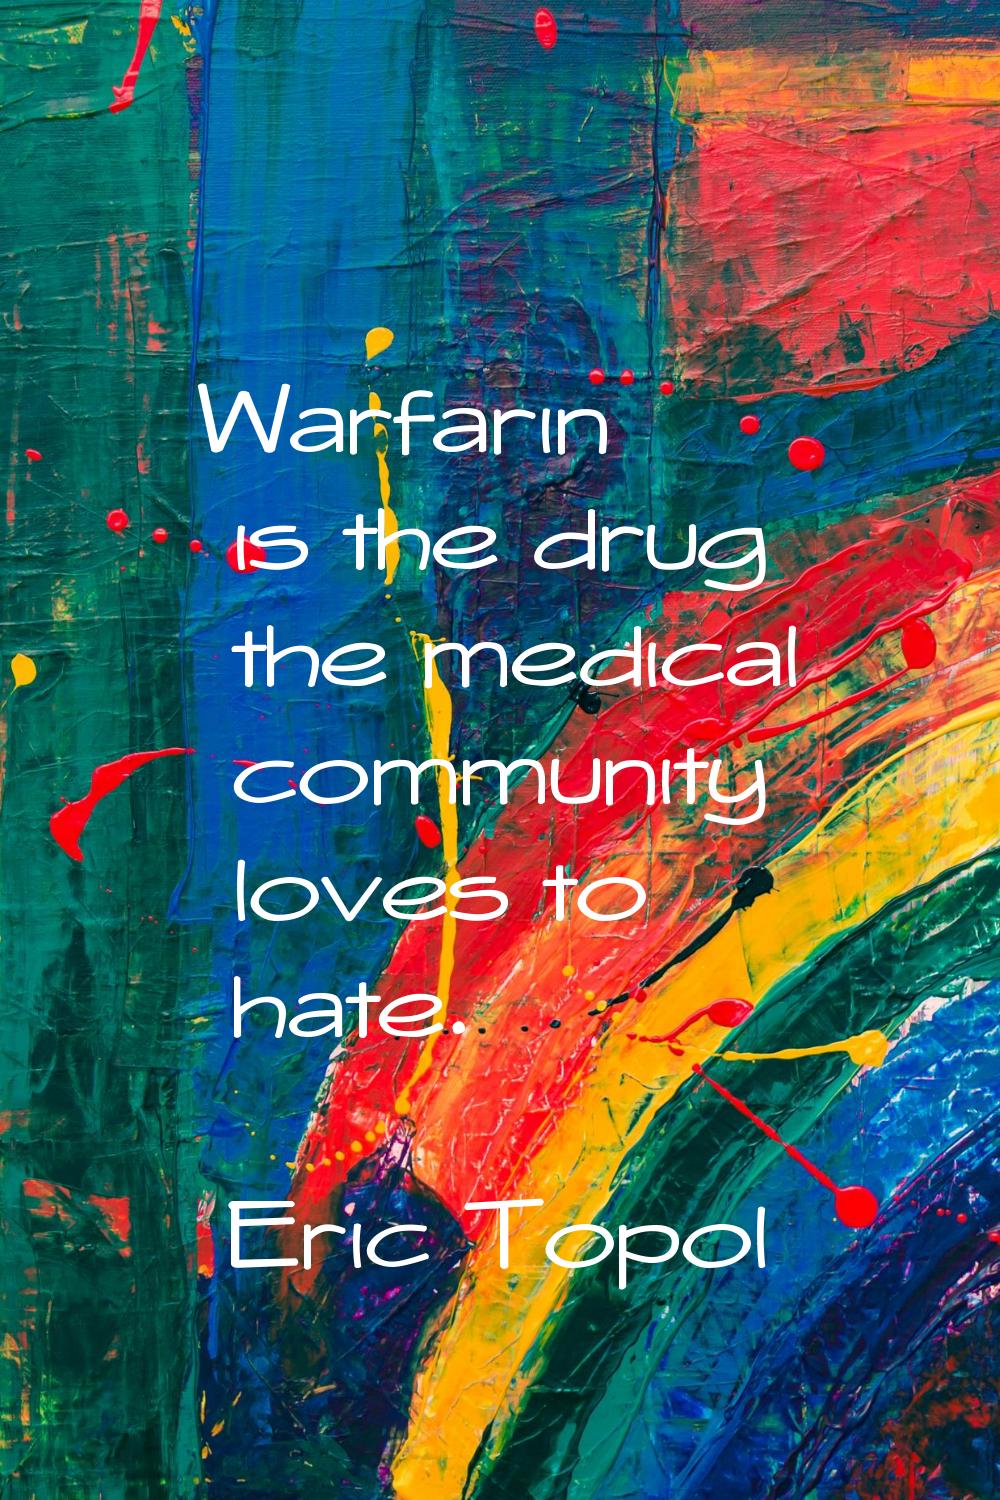 Warfarin is the drug the medical community loves to hate.